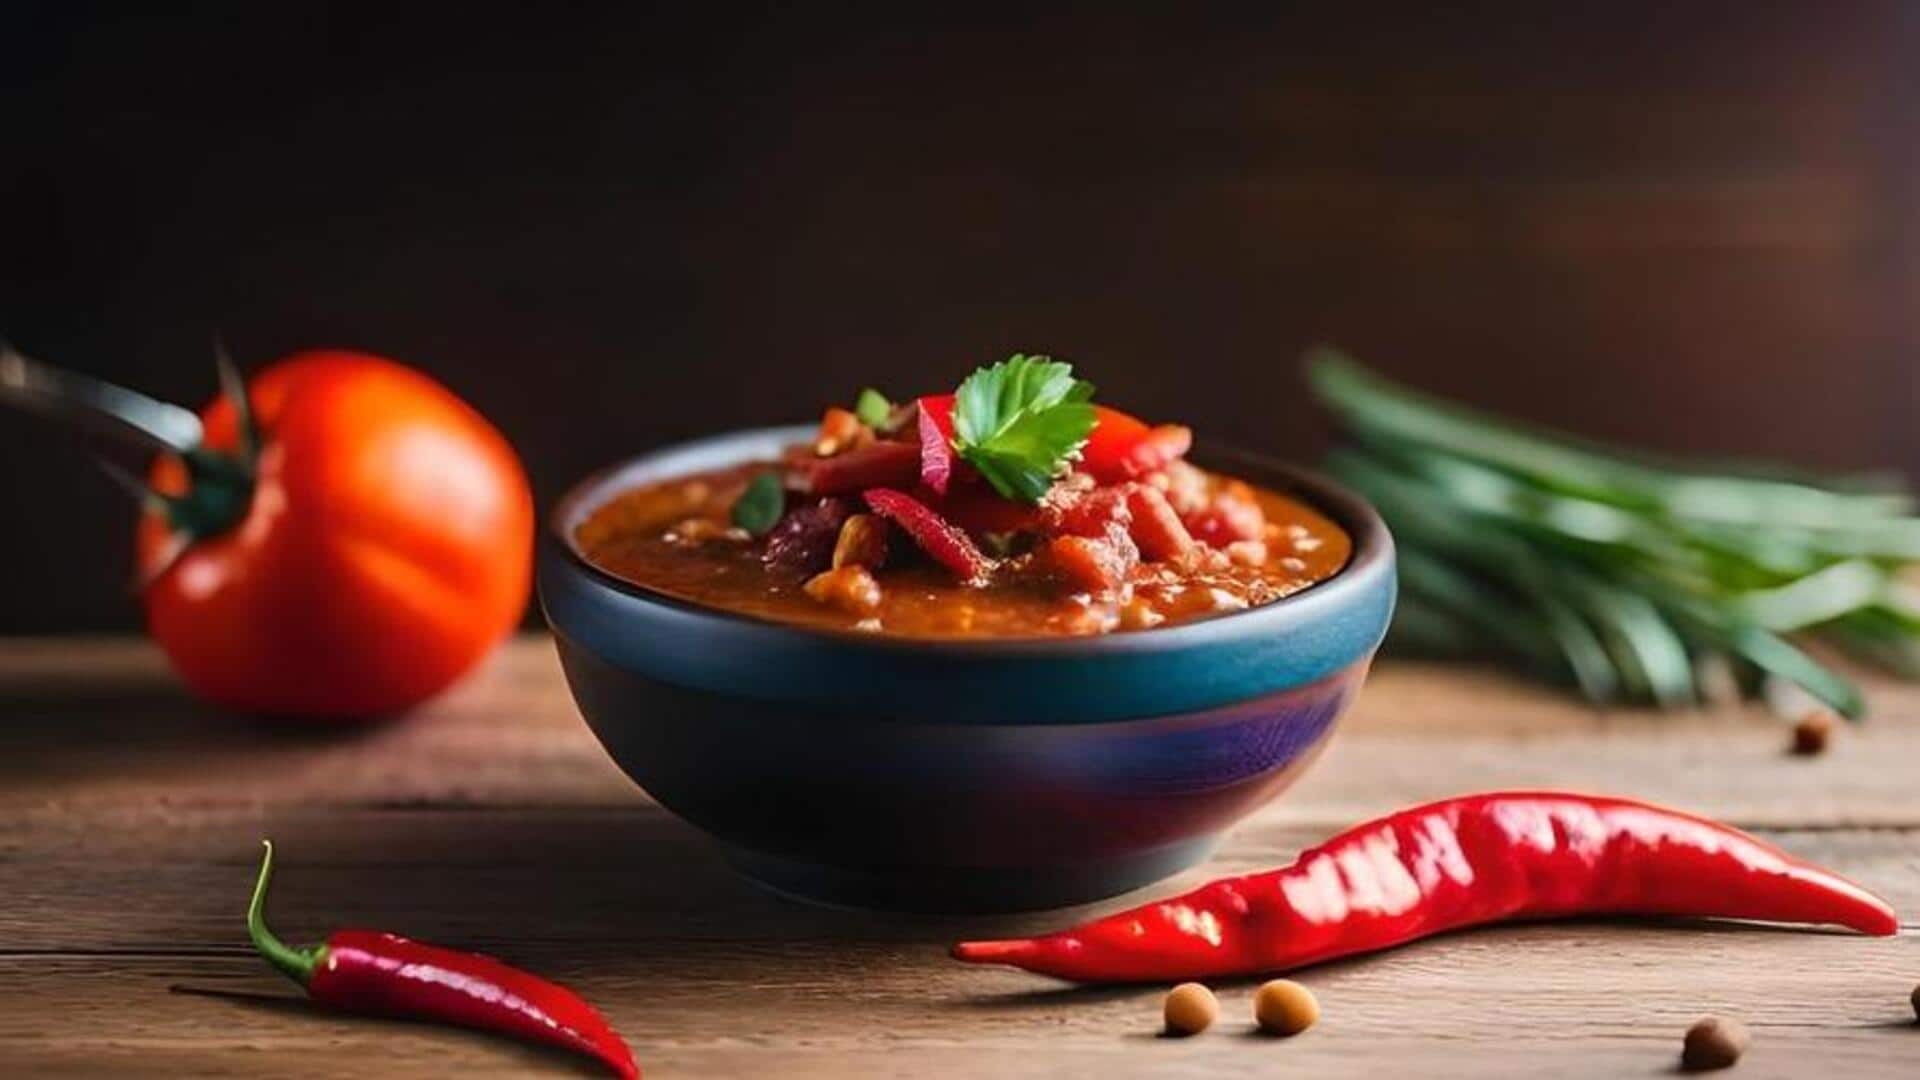 Recipe-o'-clock: Try this delicious vegetarian chili dish